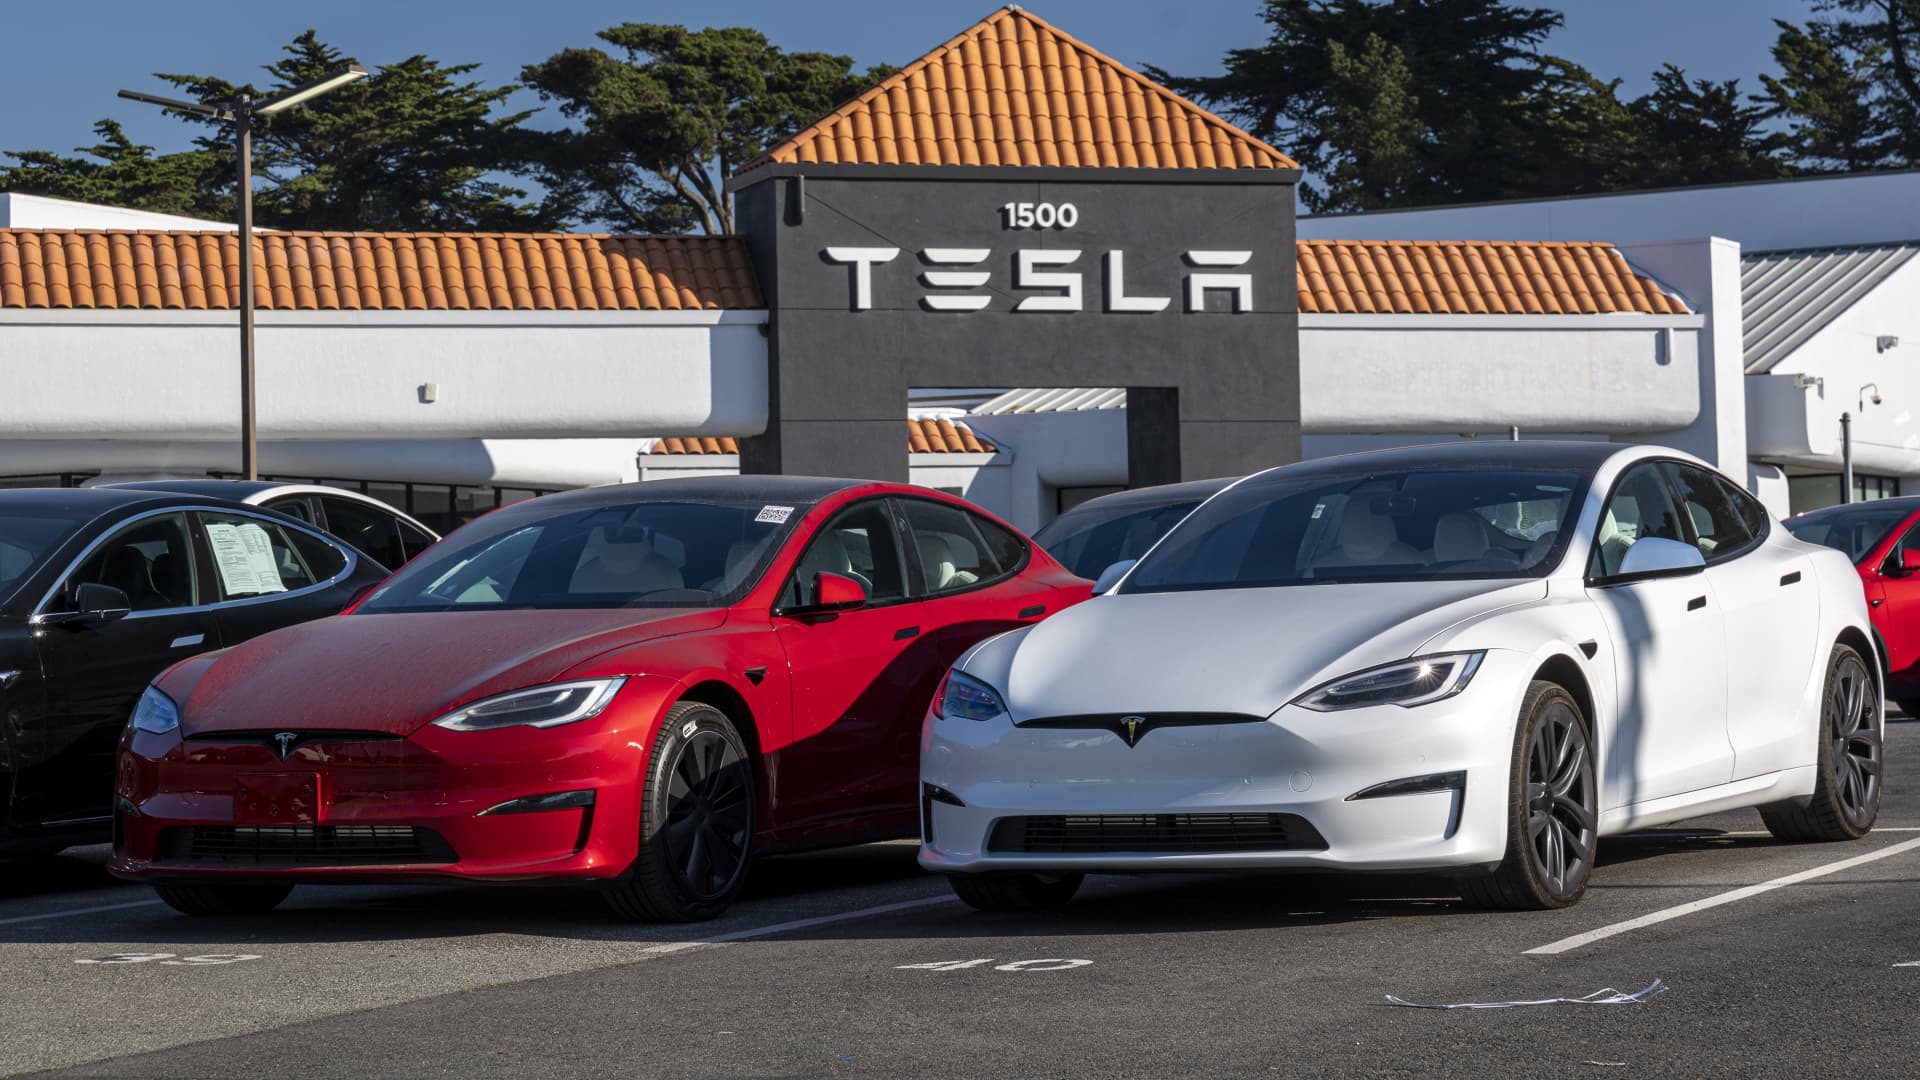 Options traders bet on big post-earnings gains for Tesla